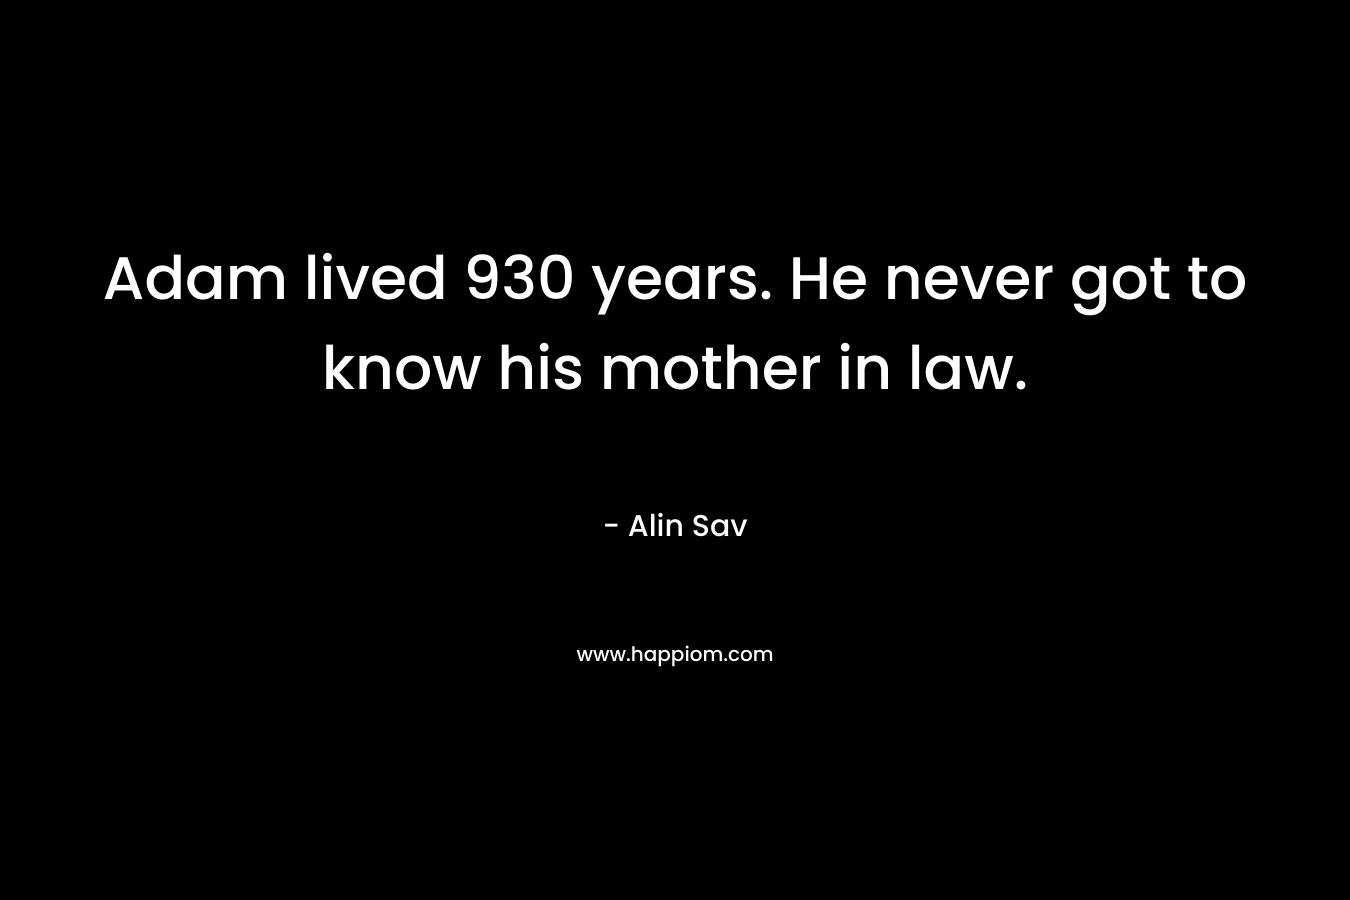 Adam lived 930 years. He never got to know his mother in law.